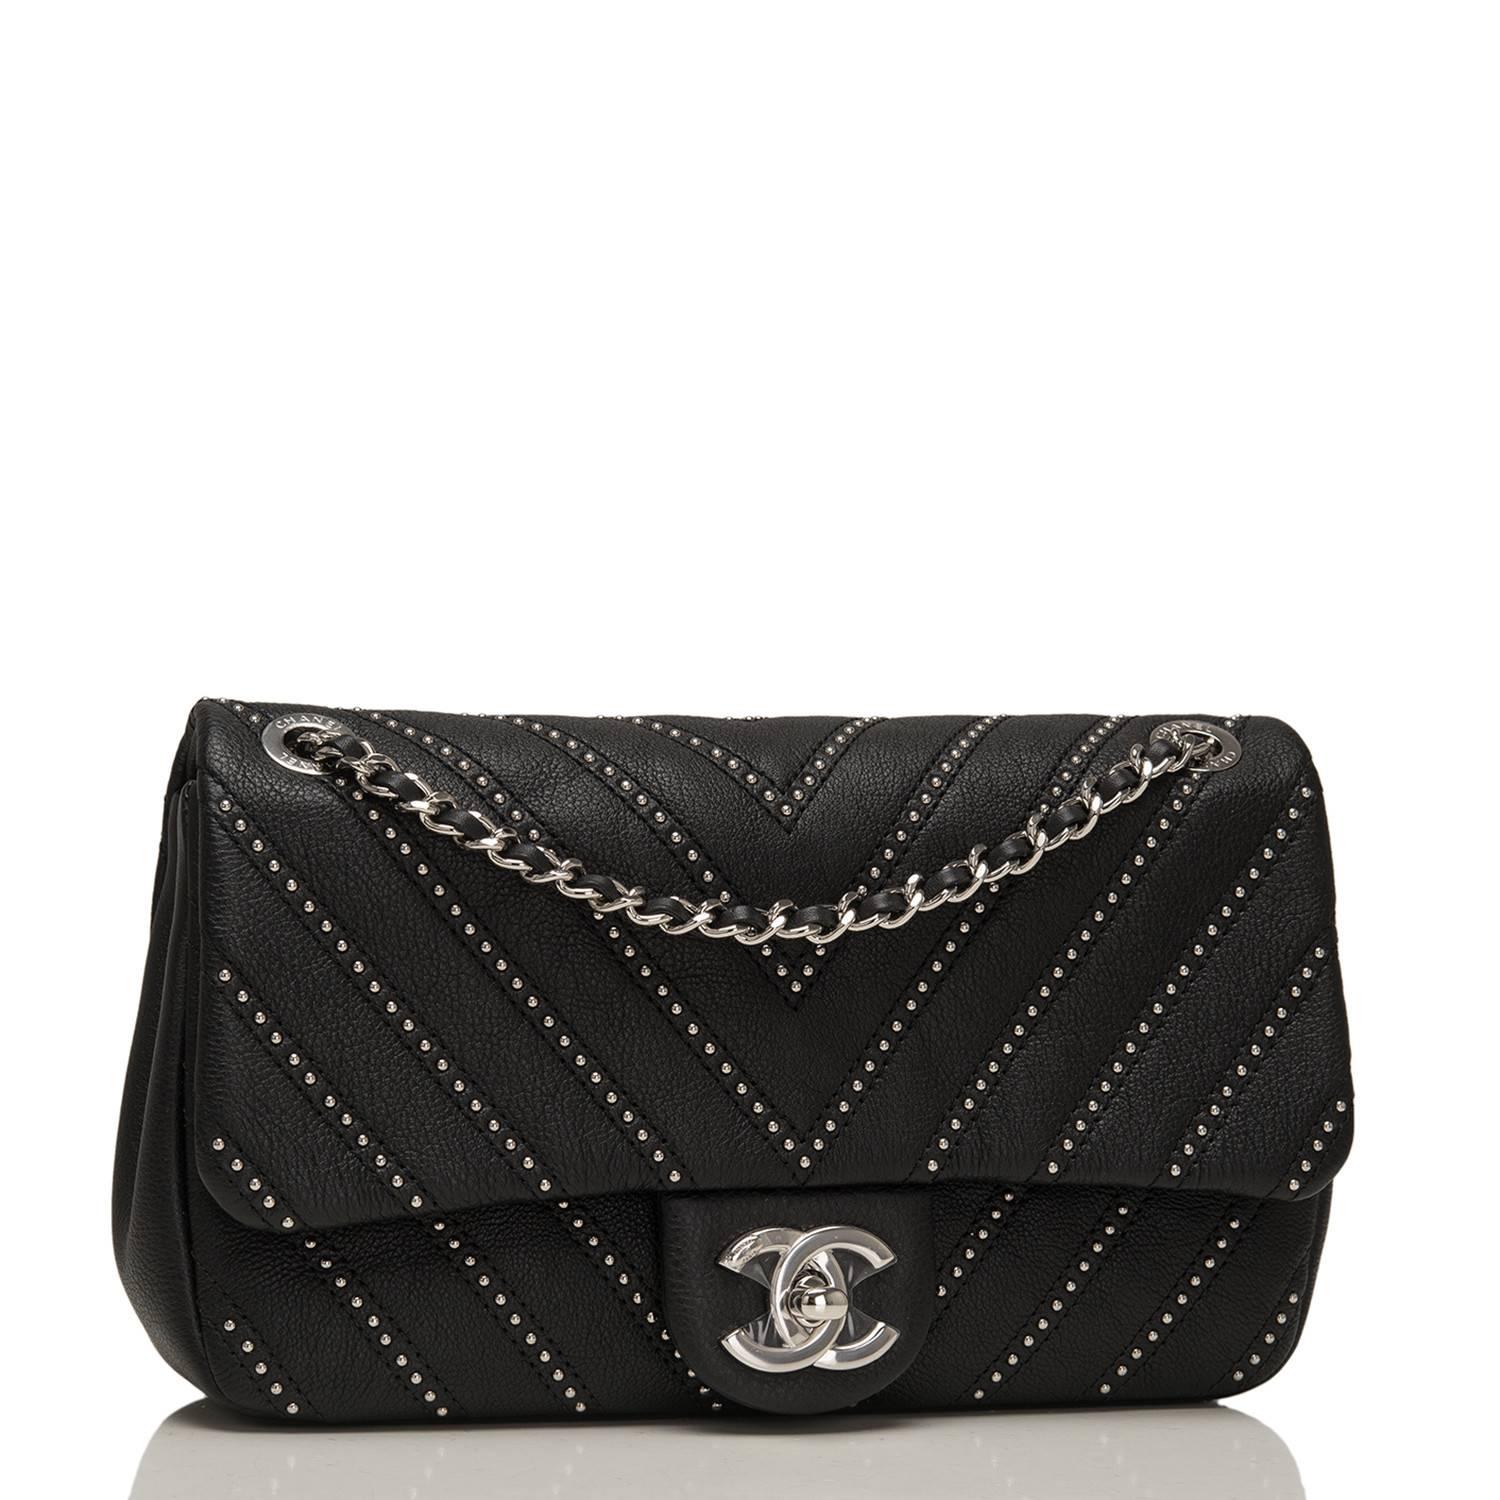 Chanel flap bag of black studded calfskin leather with silver tone hardware.

This bag has a front flap with signature CC turnlock closure, rear half moon pocket and single interwoven black leather and silver tone chain link shoulder/crossbody strap